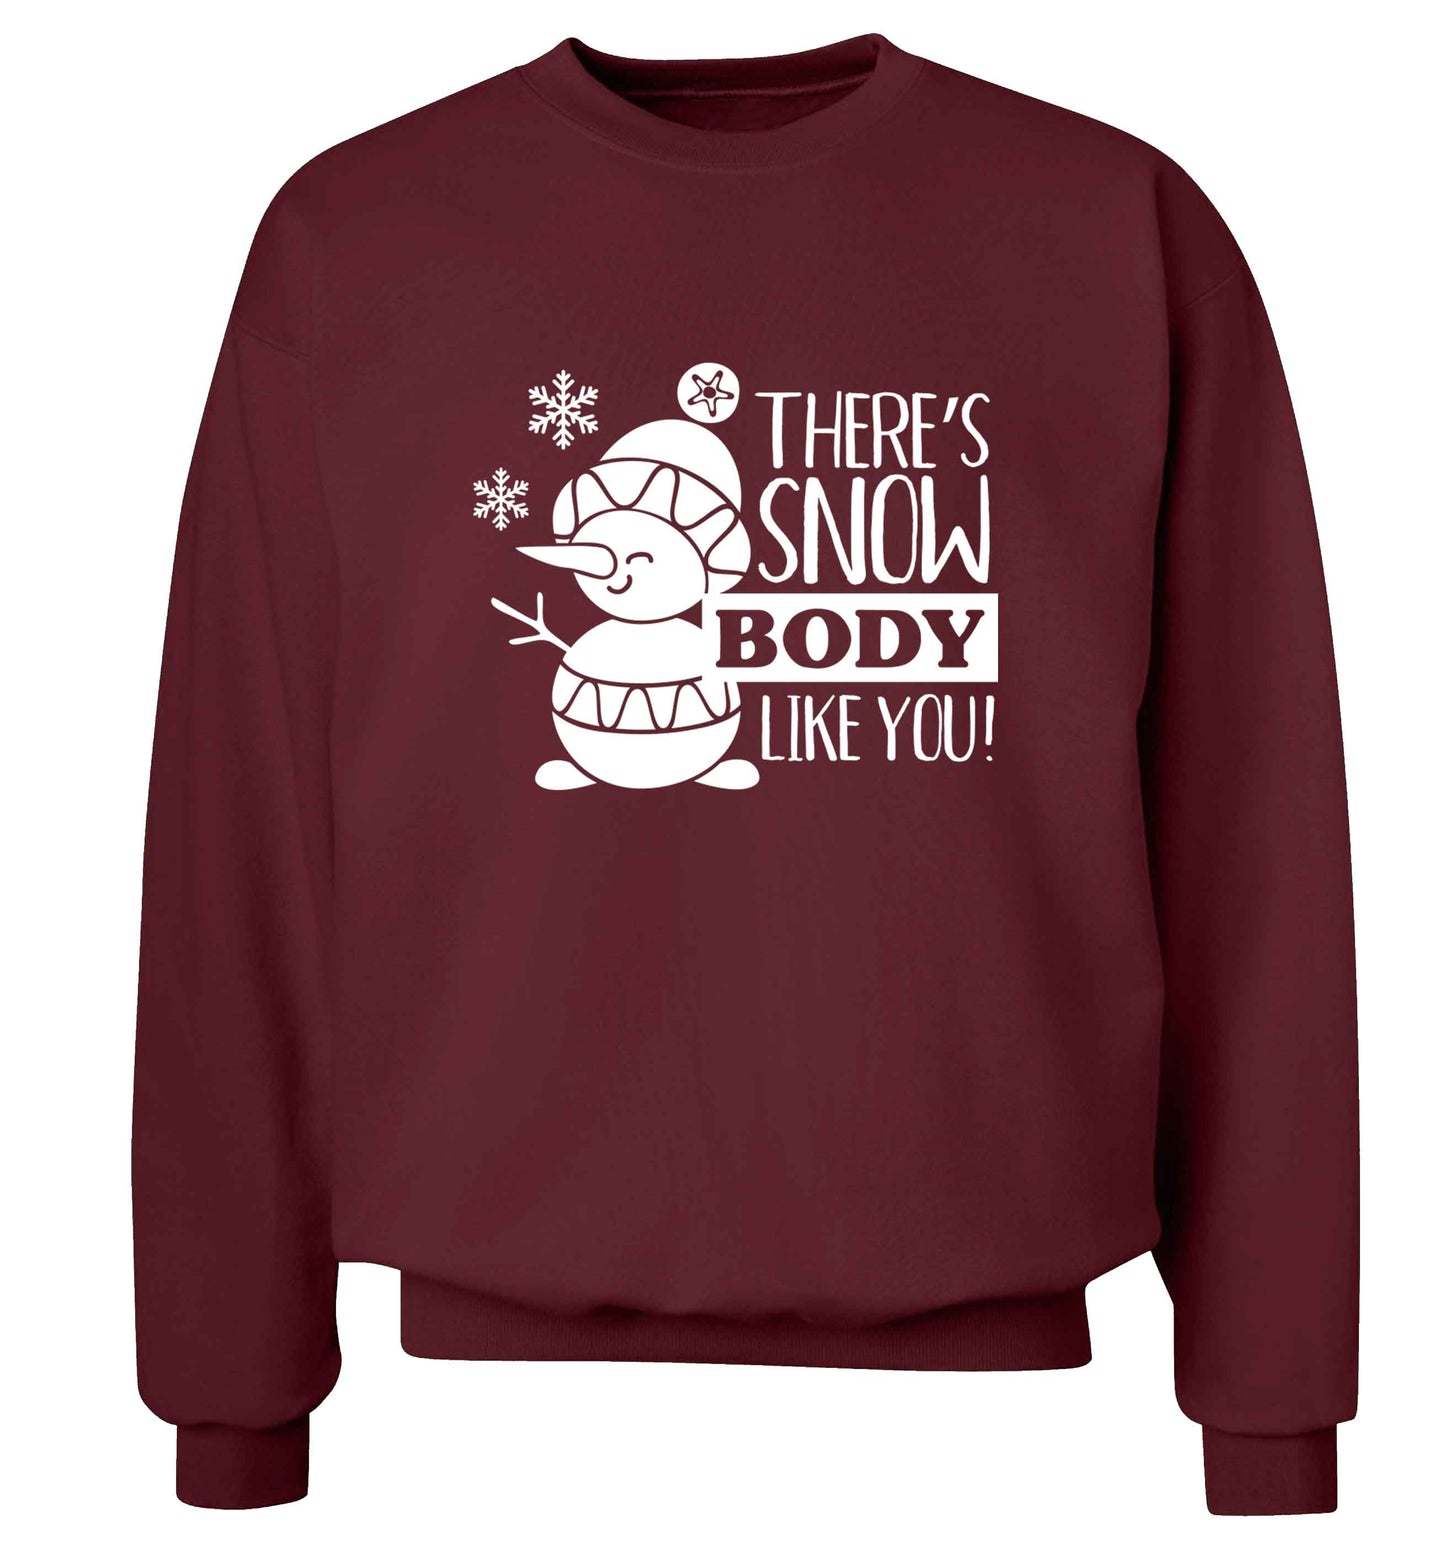 There's snow body like you adult's unisex maroon sweater 2XL